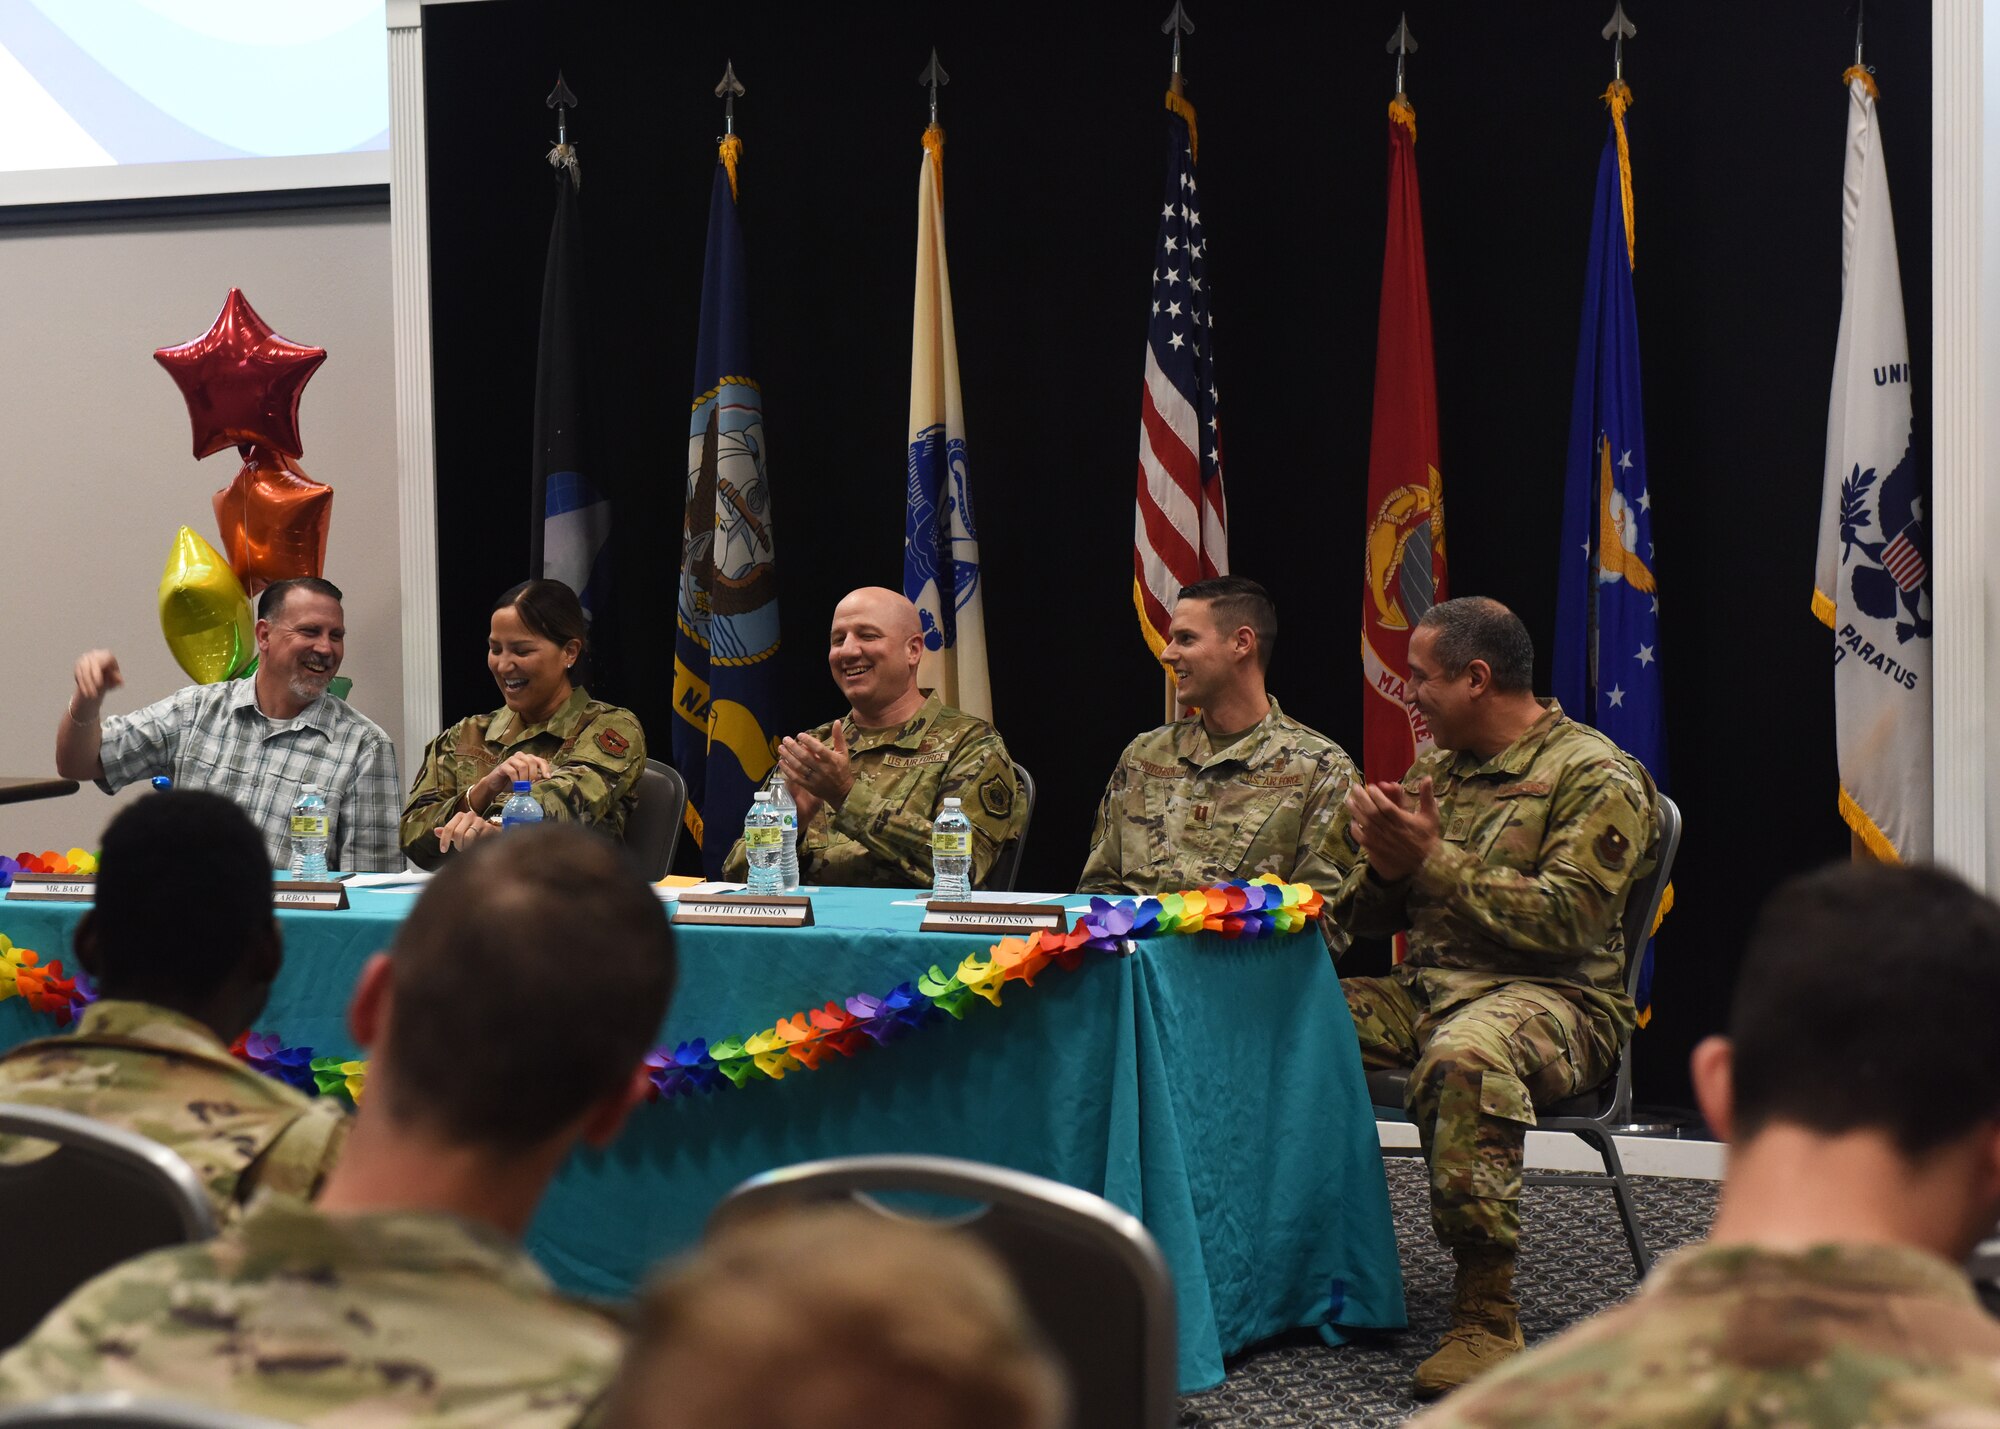 17th Training Wing leaders share stories during the Pride Month Kickoff and Leadership Panel, Goodfellow Air Force Base, Texas, June 6, 2022. Pride Month is federally recognized and allows LGBTQ+ members to share experiences and come together as a community. (U.S. Air Force photo by Airman 1st Class Zachary Heimbuch)